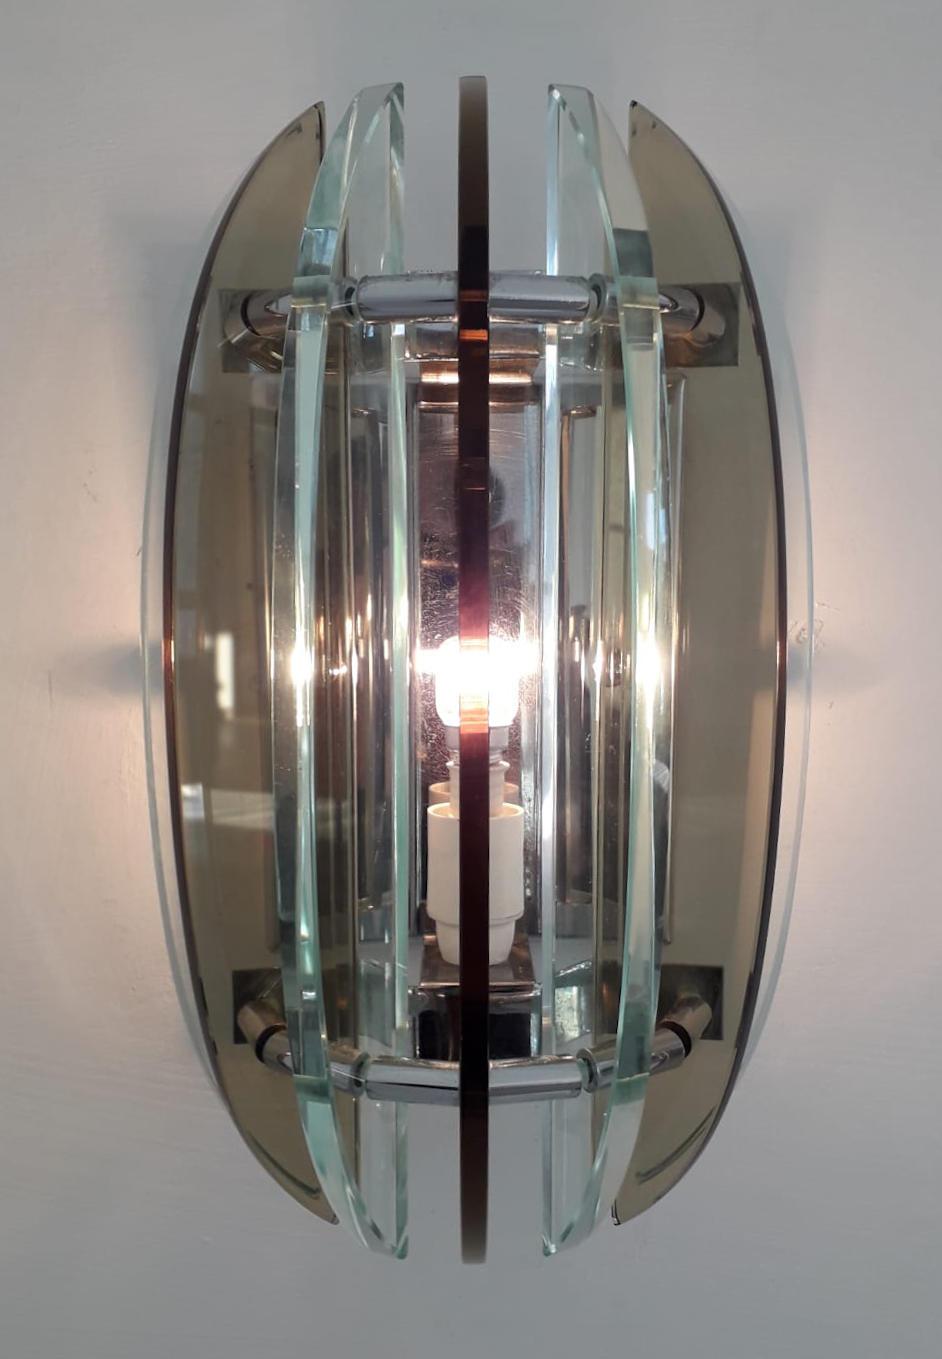 Pair of Italian wall lights with clear and smoky brown beveled glass on nickel frame / Made in Italy by Veca, circa 1960s.
1 light / E12 or E14 type/ max 40W
Measures: Height 11 inches, width 7 inches, depth 5 inches
Order Reference #: FABIOLTD W803